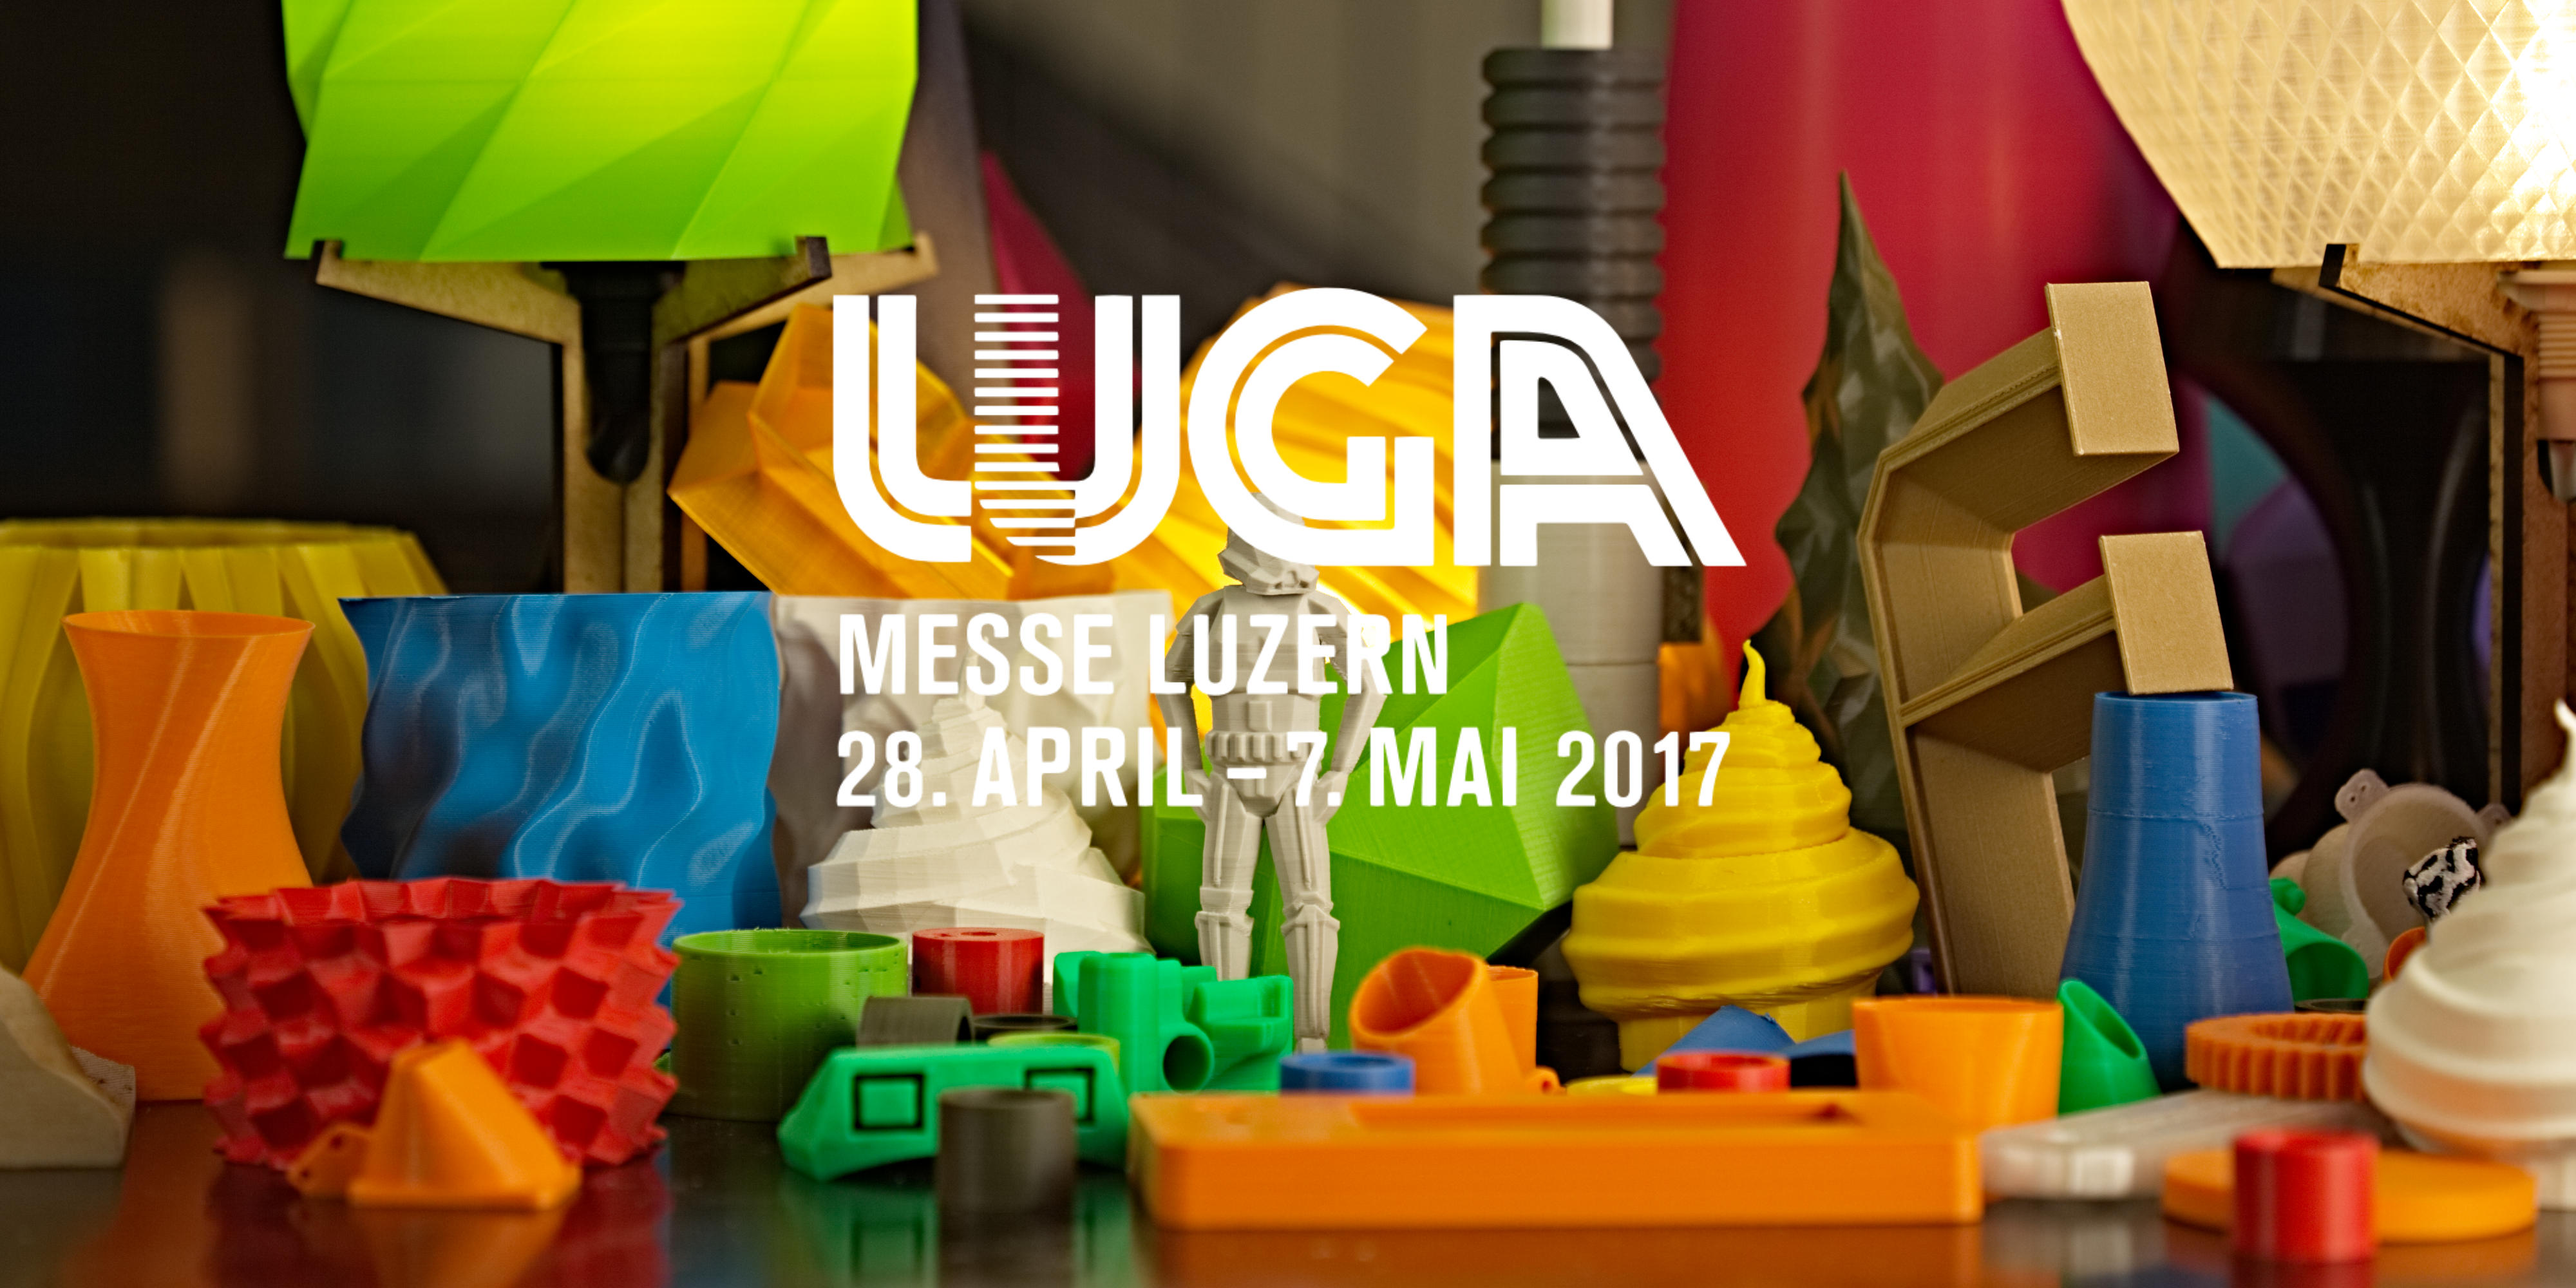 You are currently viewing 3D-DRUCKEN LUGA 2017